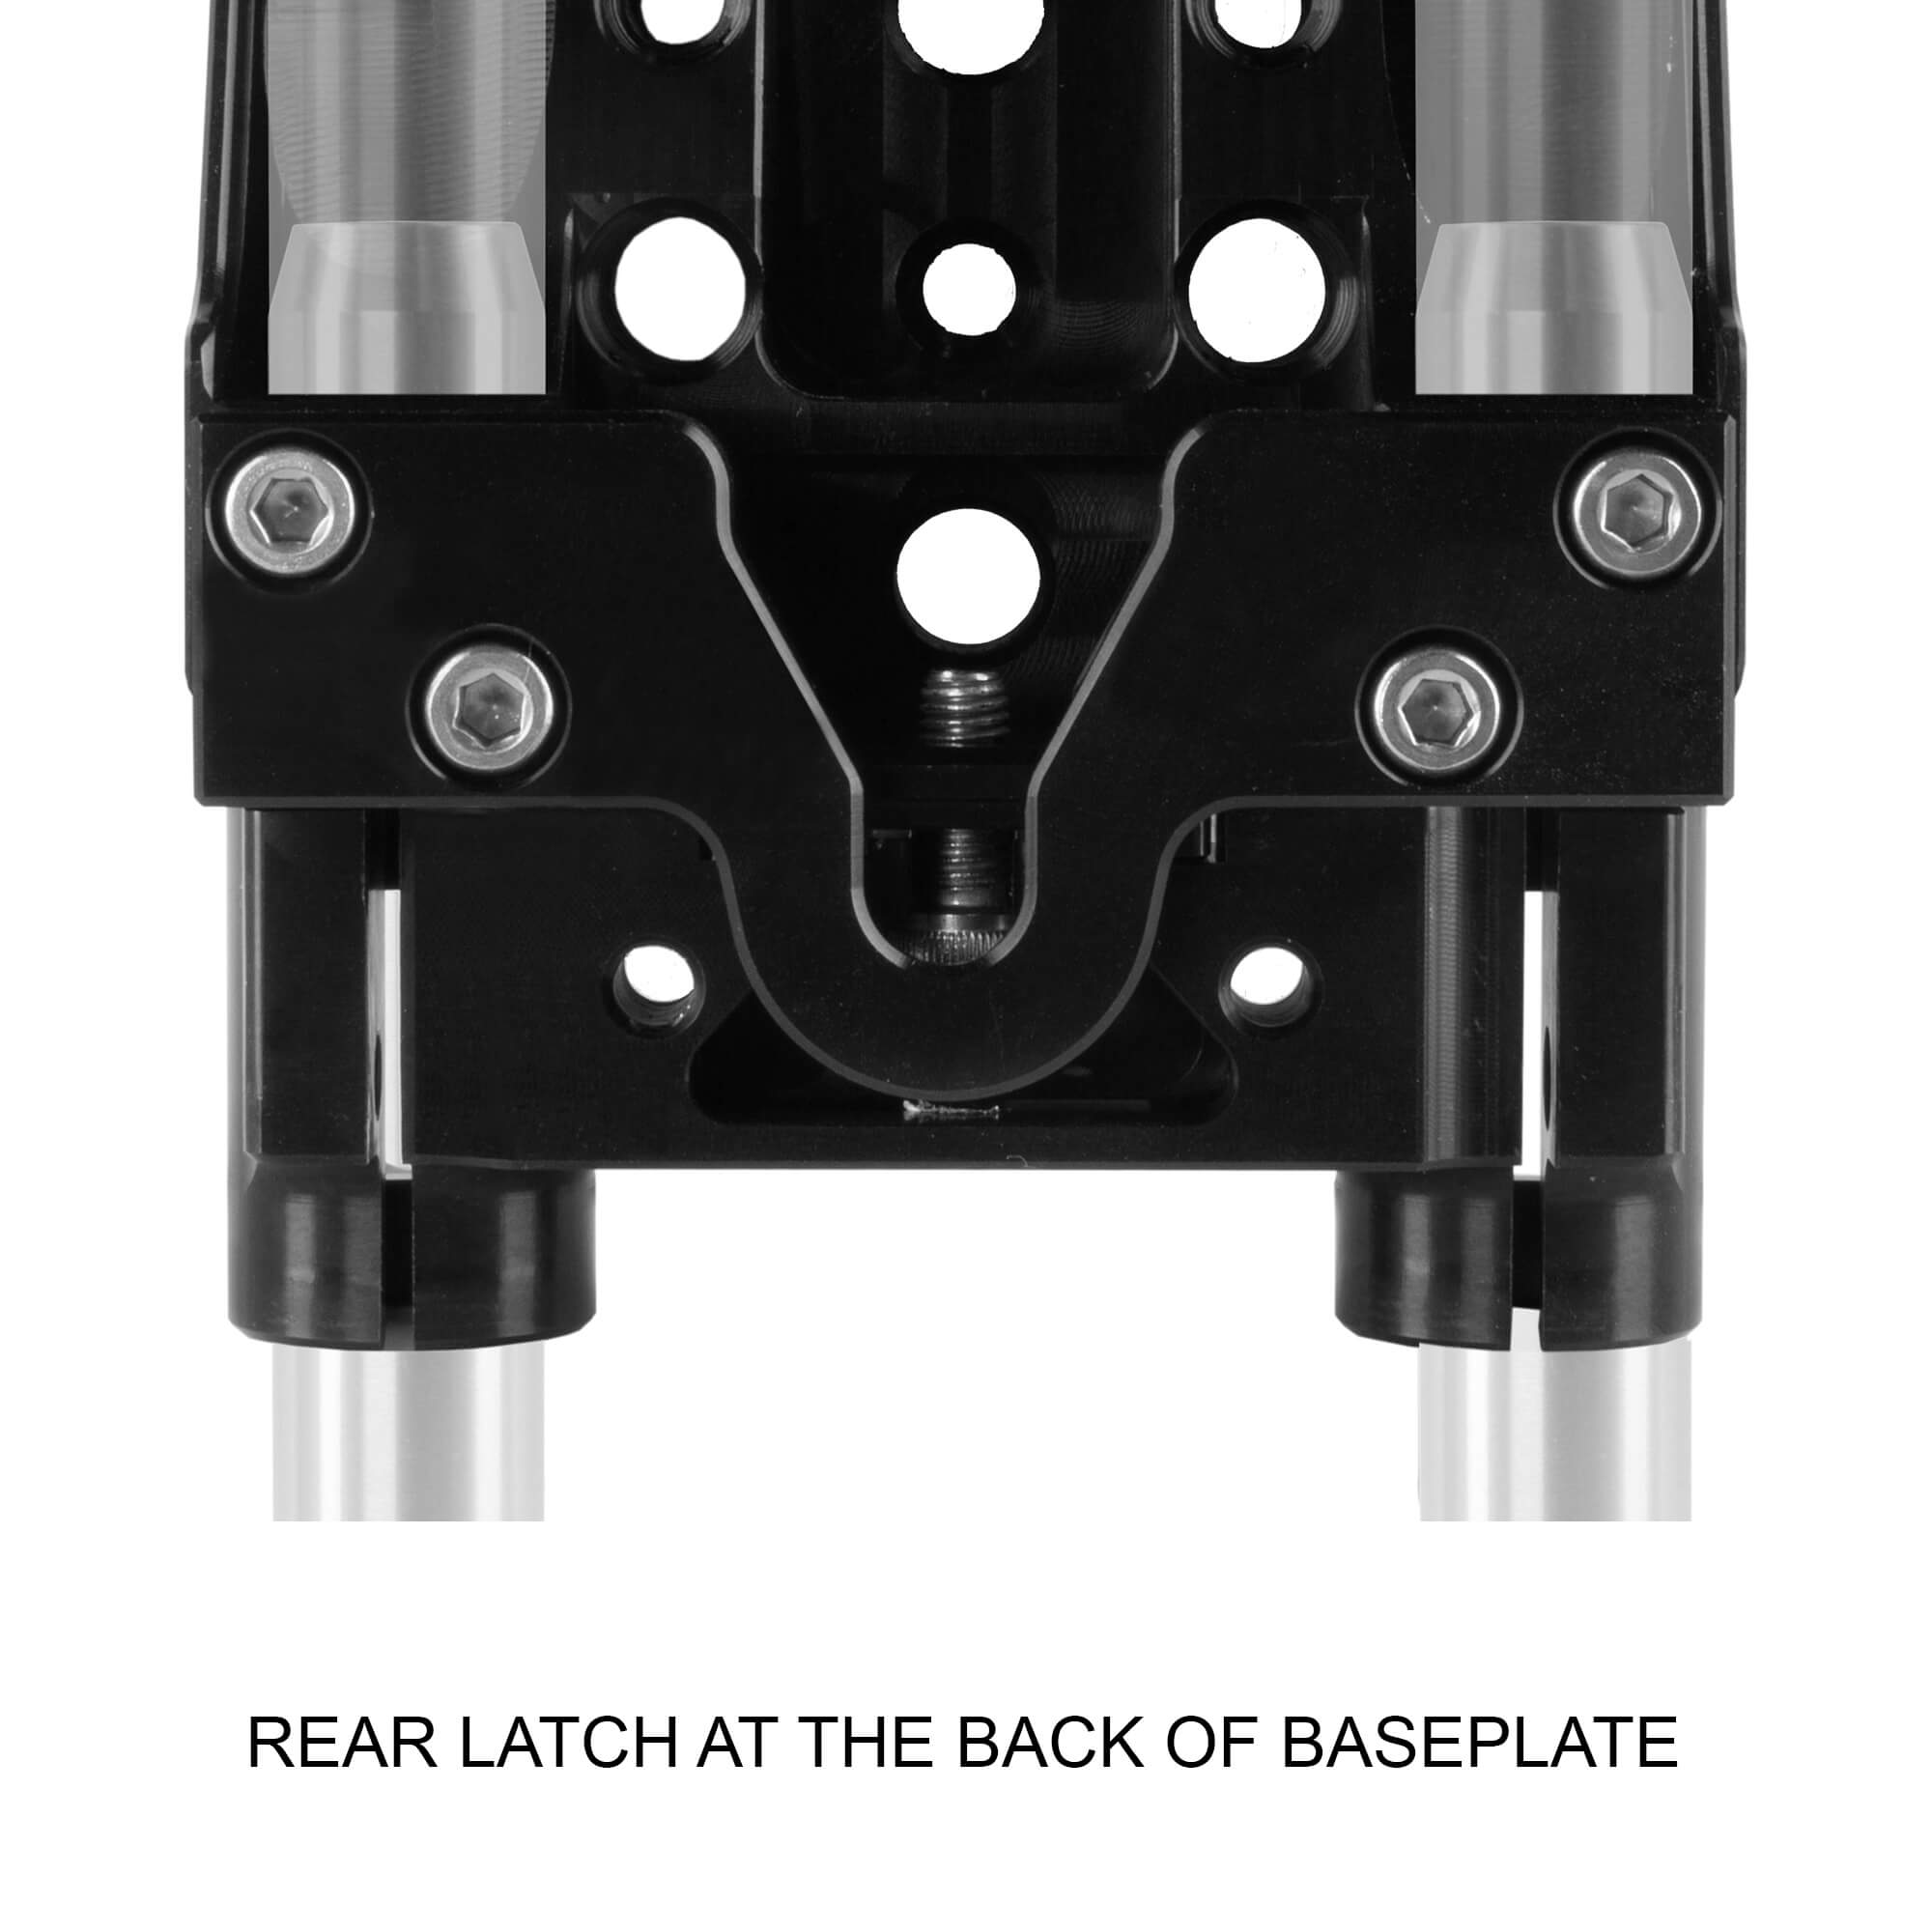 SHAPE V-Lock Quick Release Baseplate with Metabones Support for Sony FS5/FS5 II